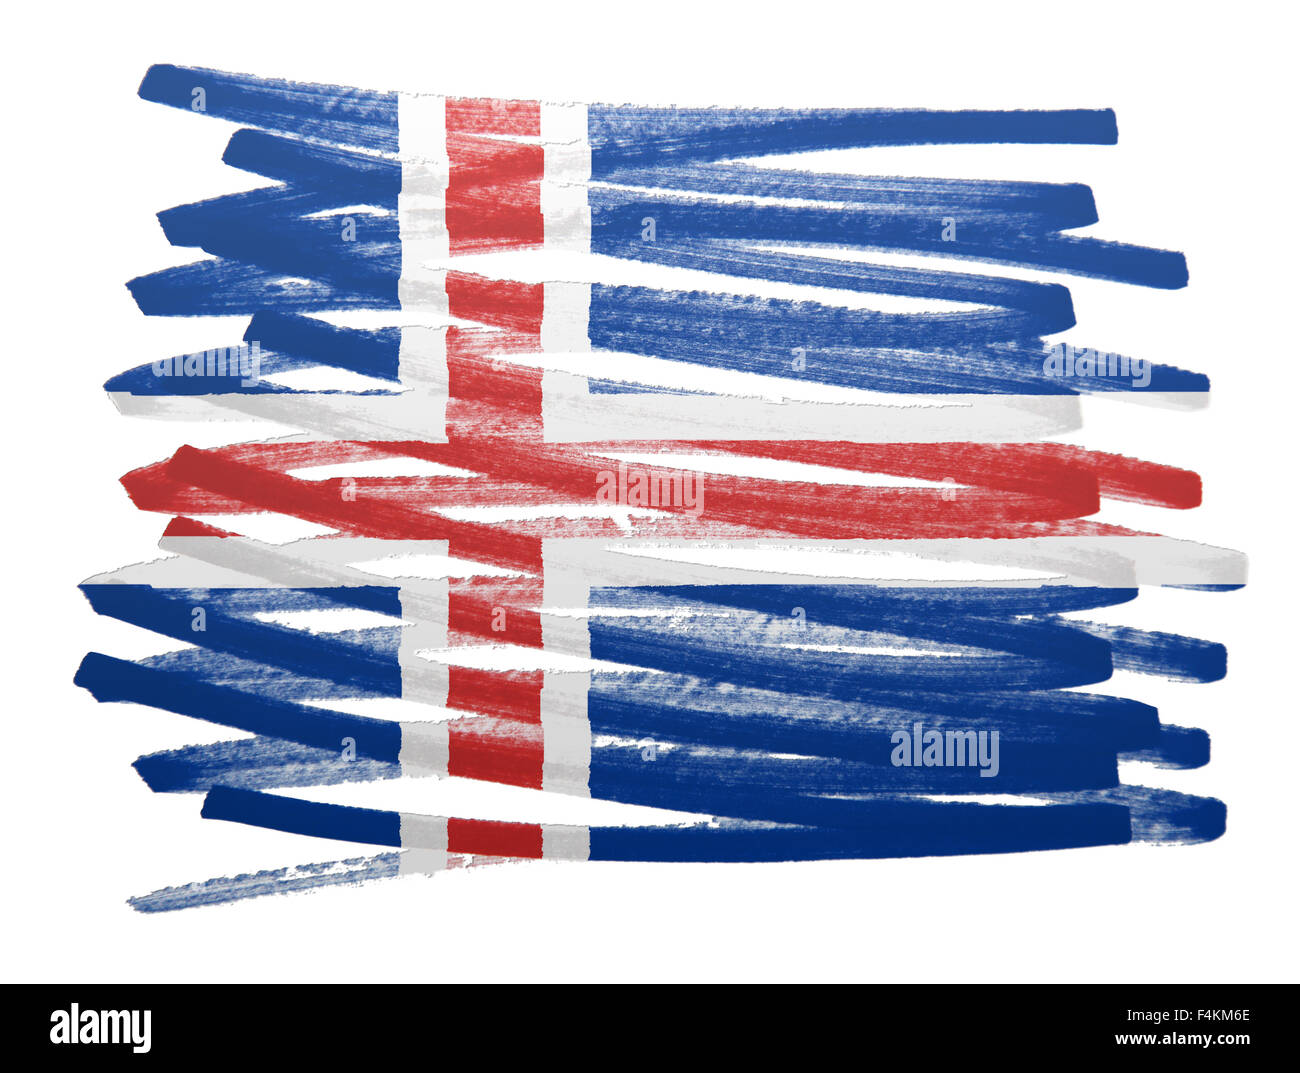 Flag illustration made with pen - Iceland Stock Photo